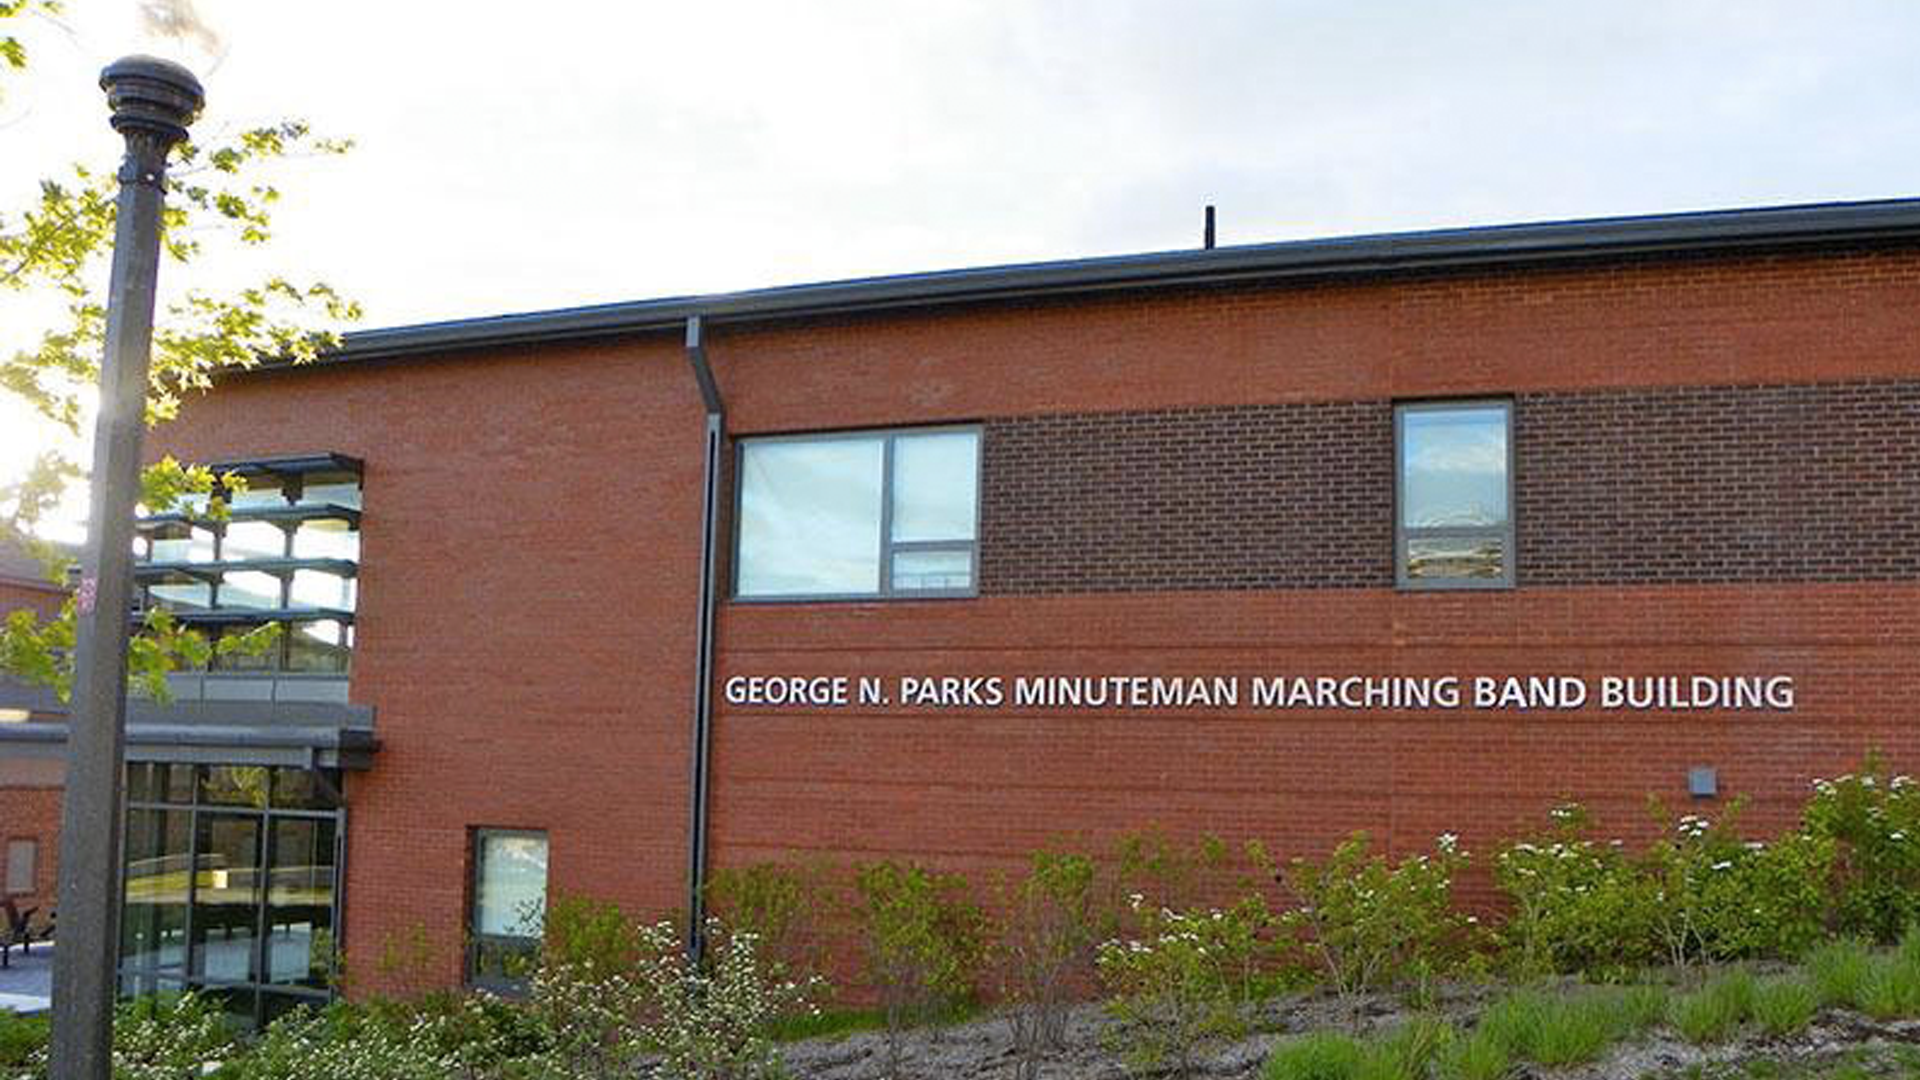 George N. Parks Minuteman Marching Band Building